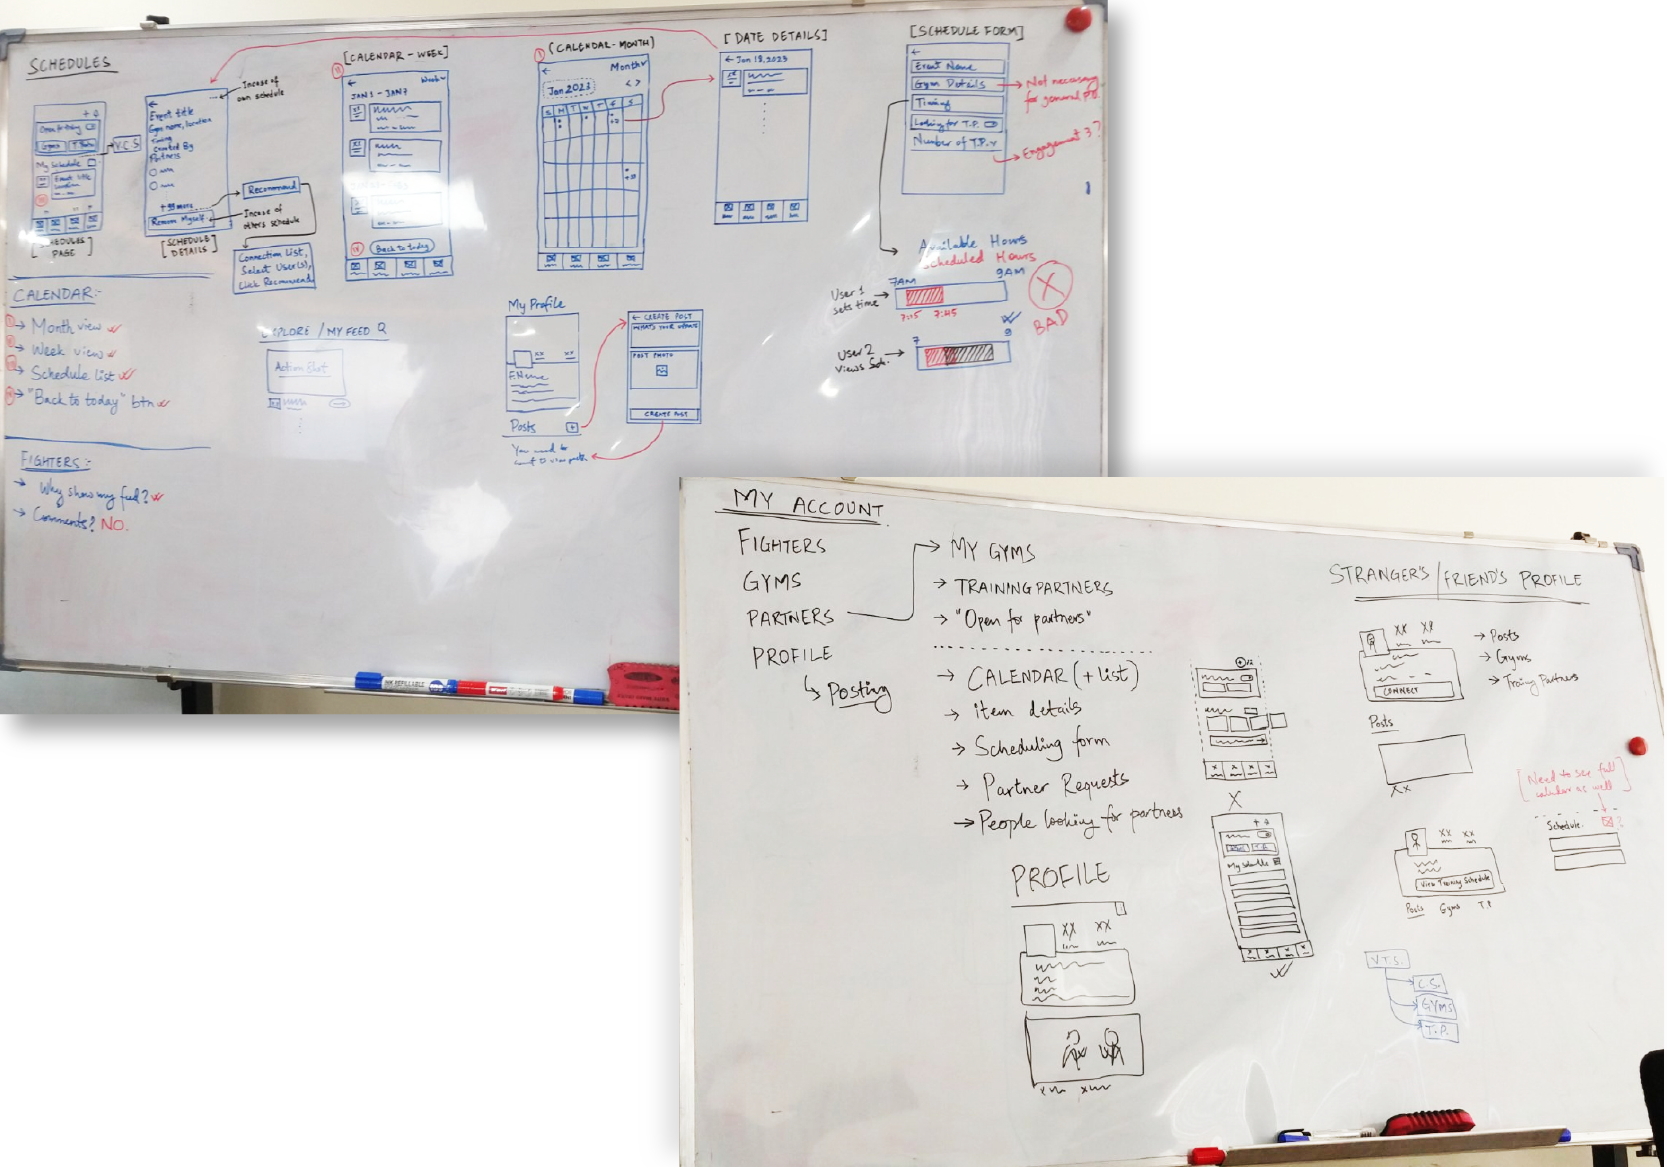 Images of two whiteboards merged together. Brainstorming for product design of app called sportslink done in the whiteboards